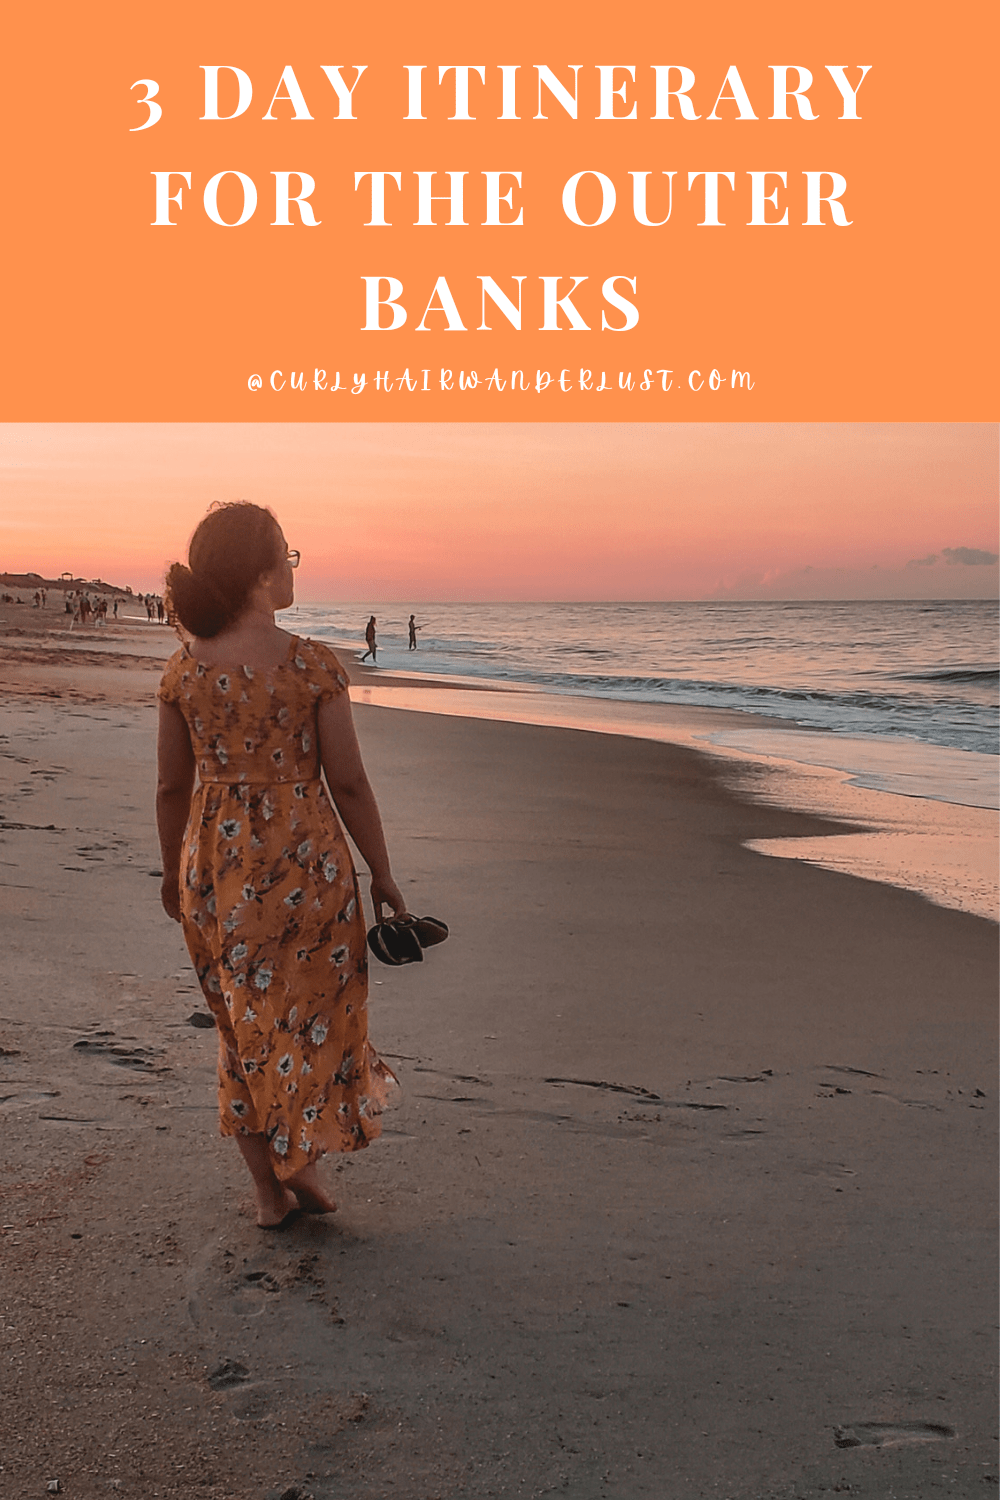 Outer banks itinerary 